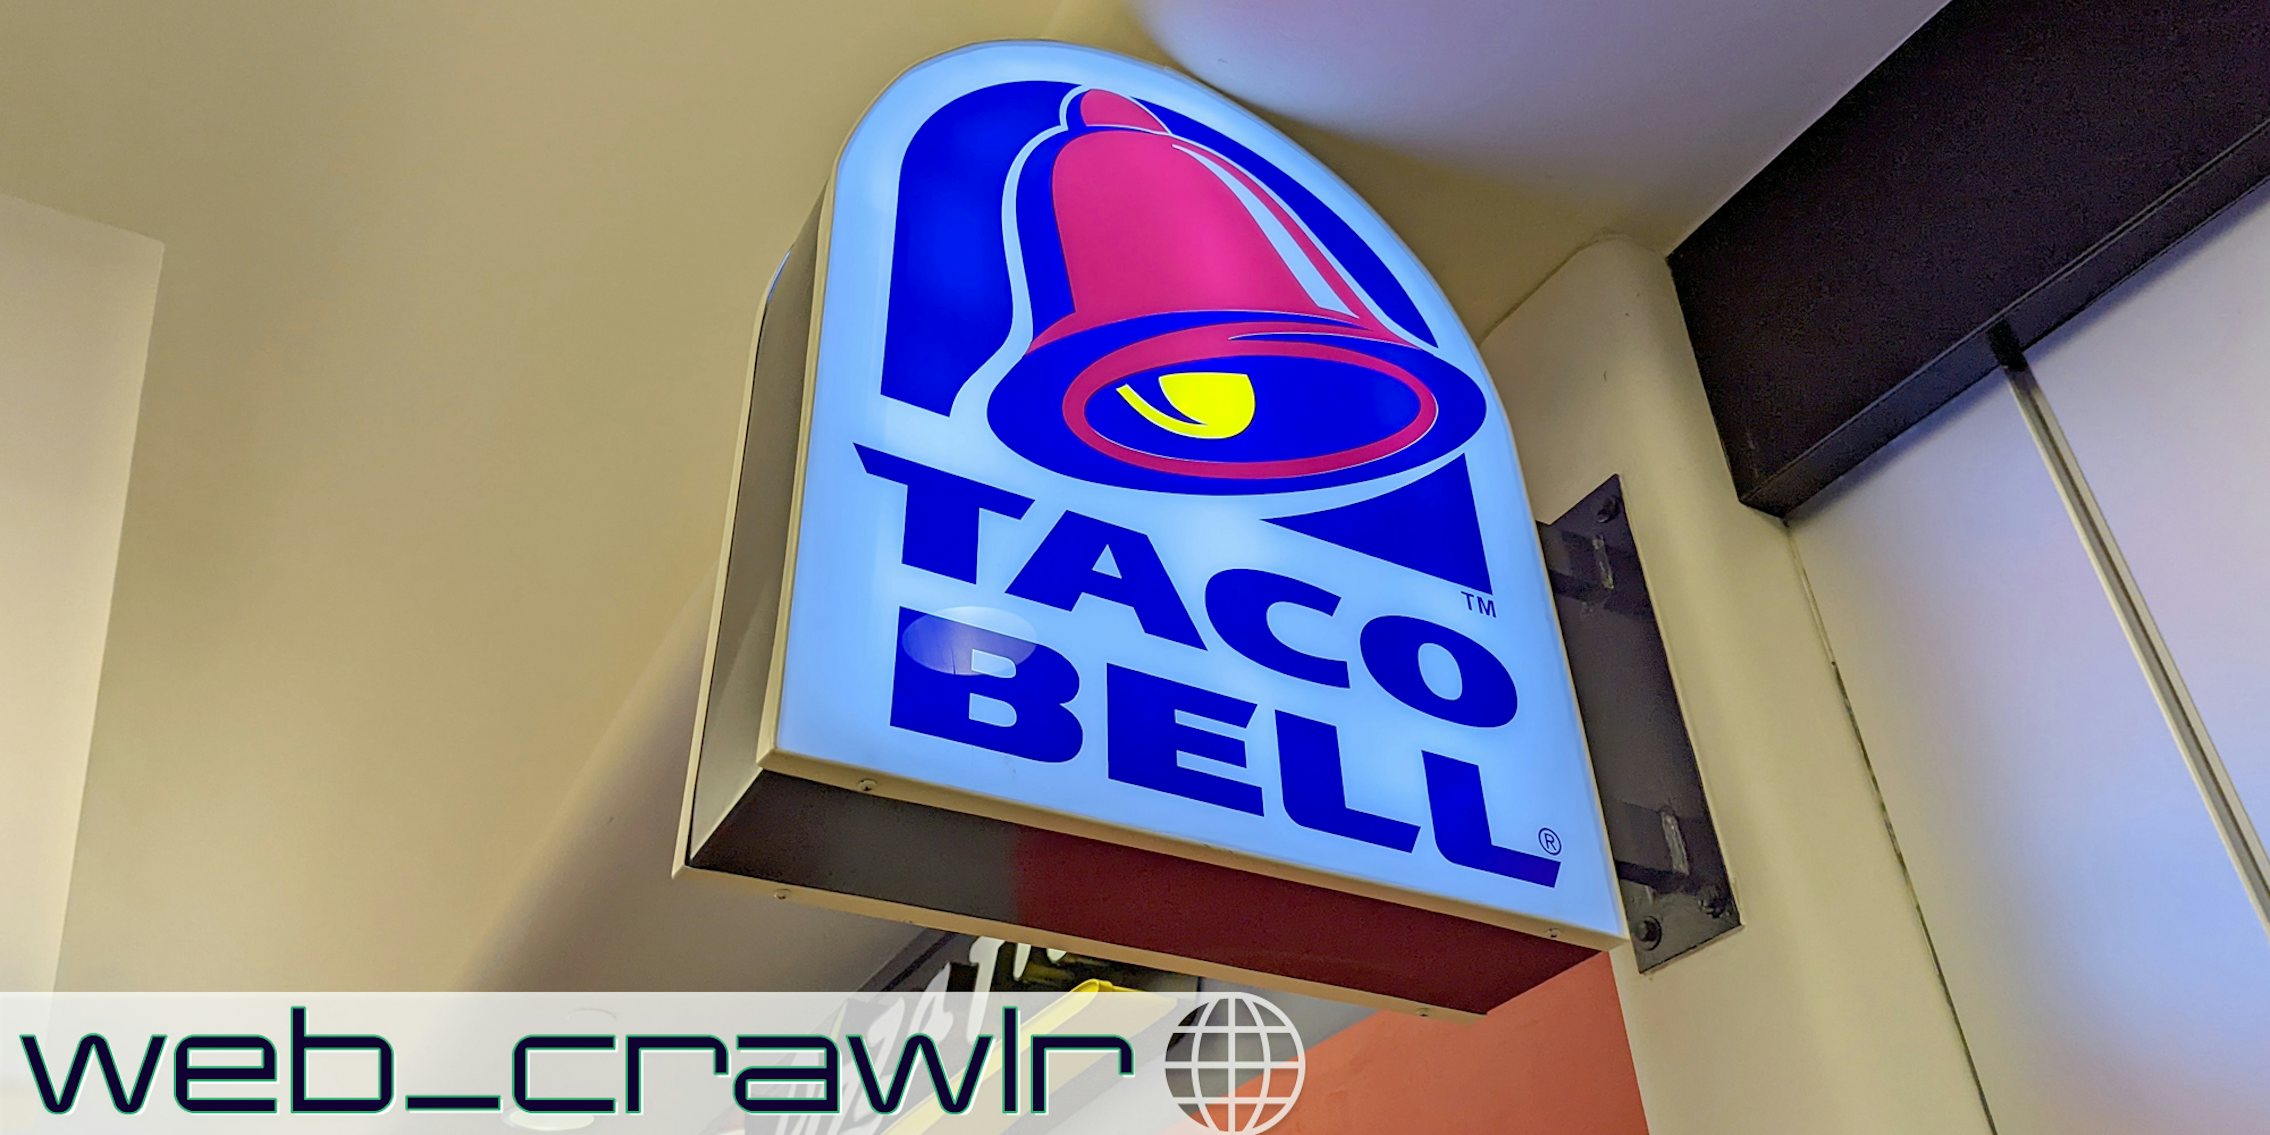 A Taco Bell sign. The Daily Dot newsletter web_crawlr logo is in the bottom left corner.